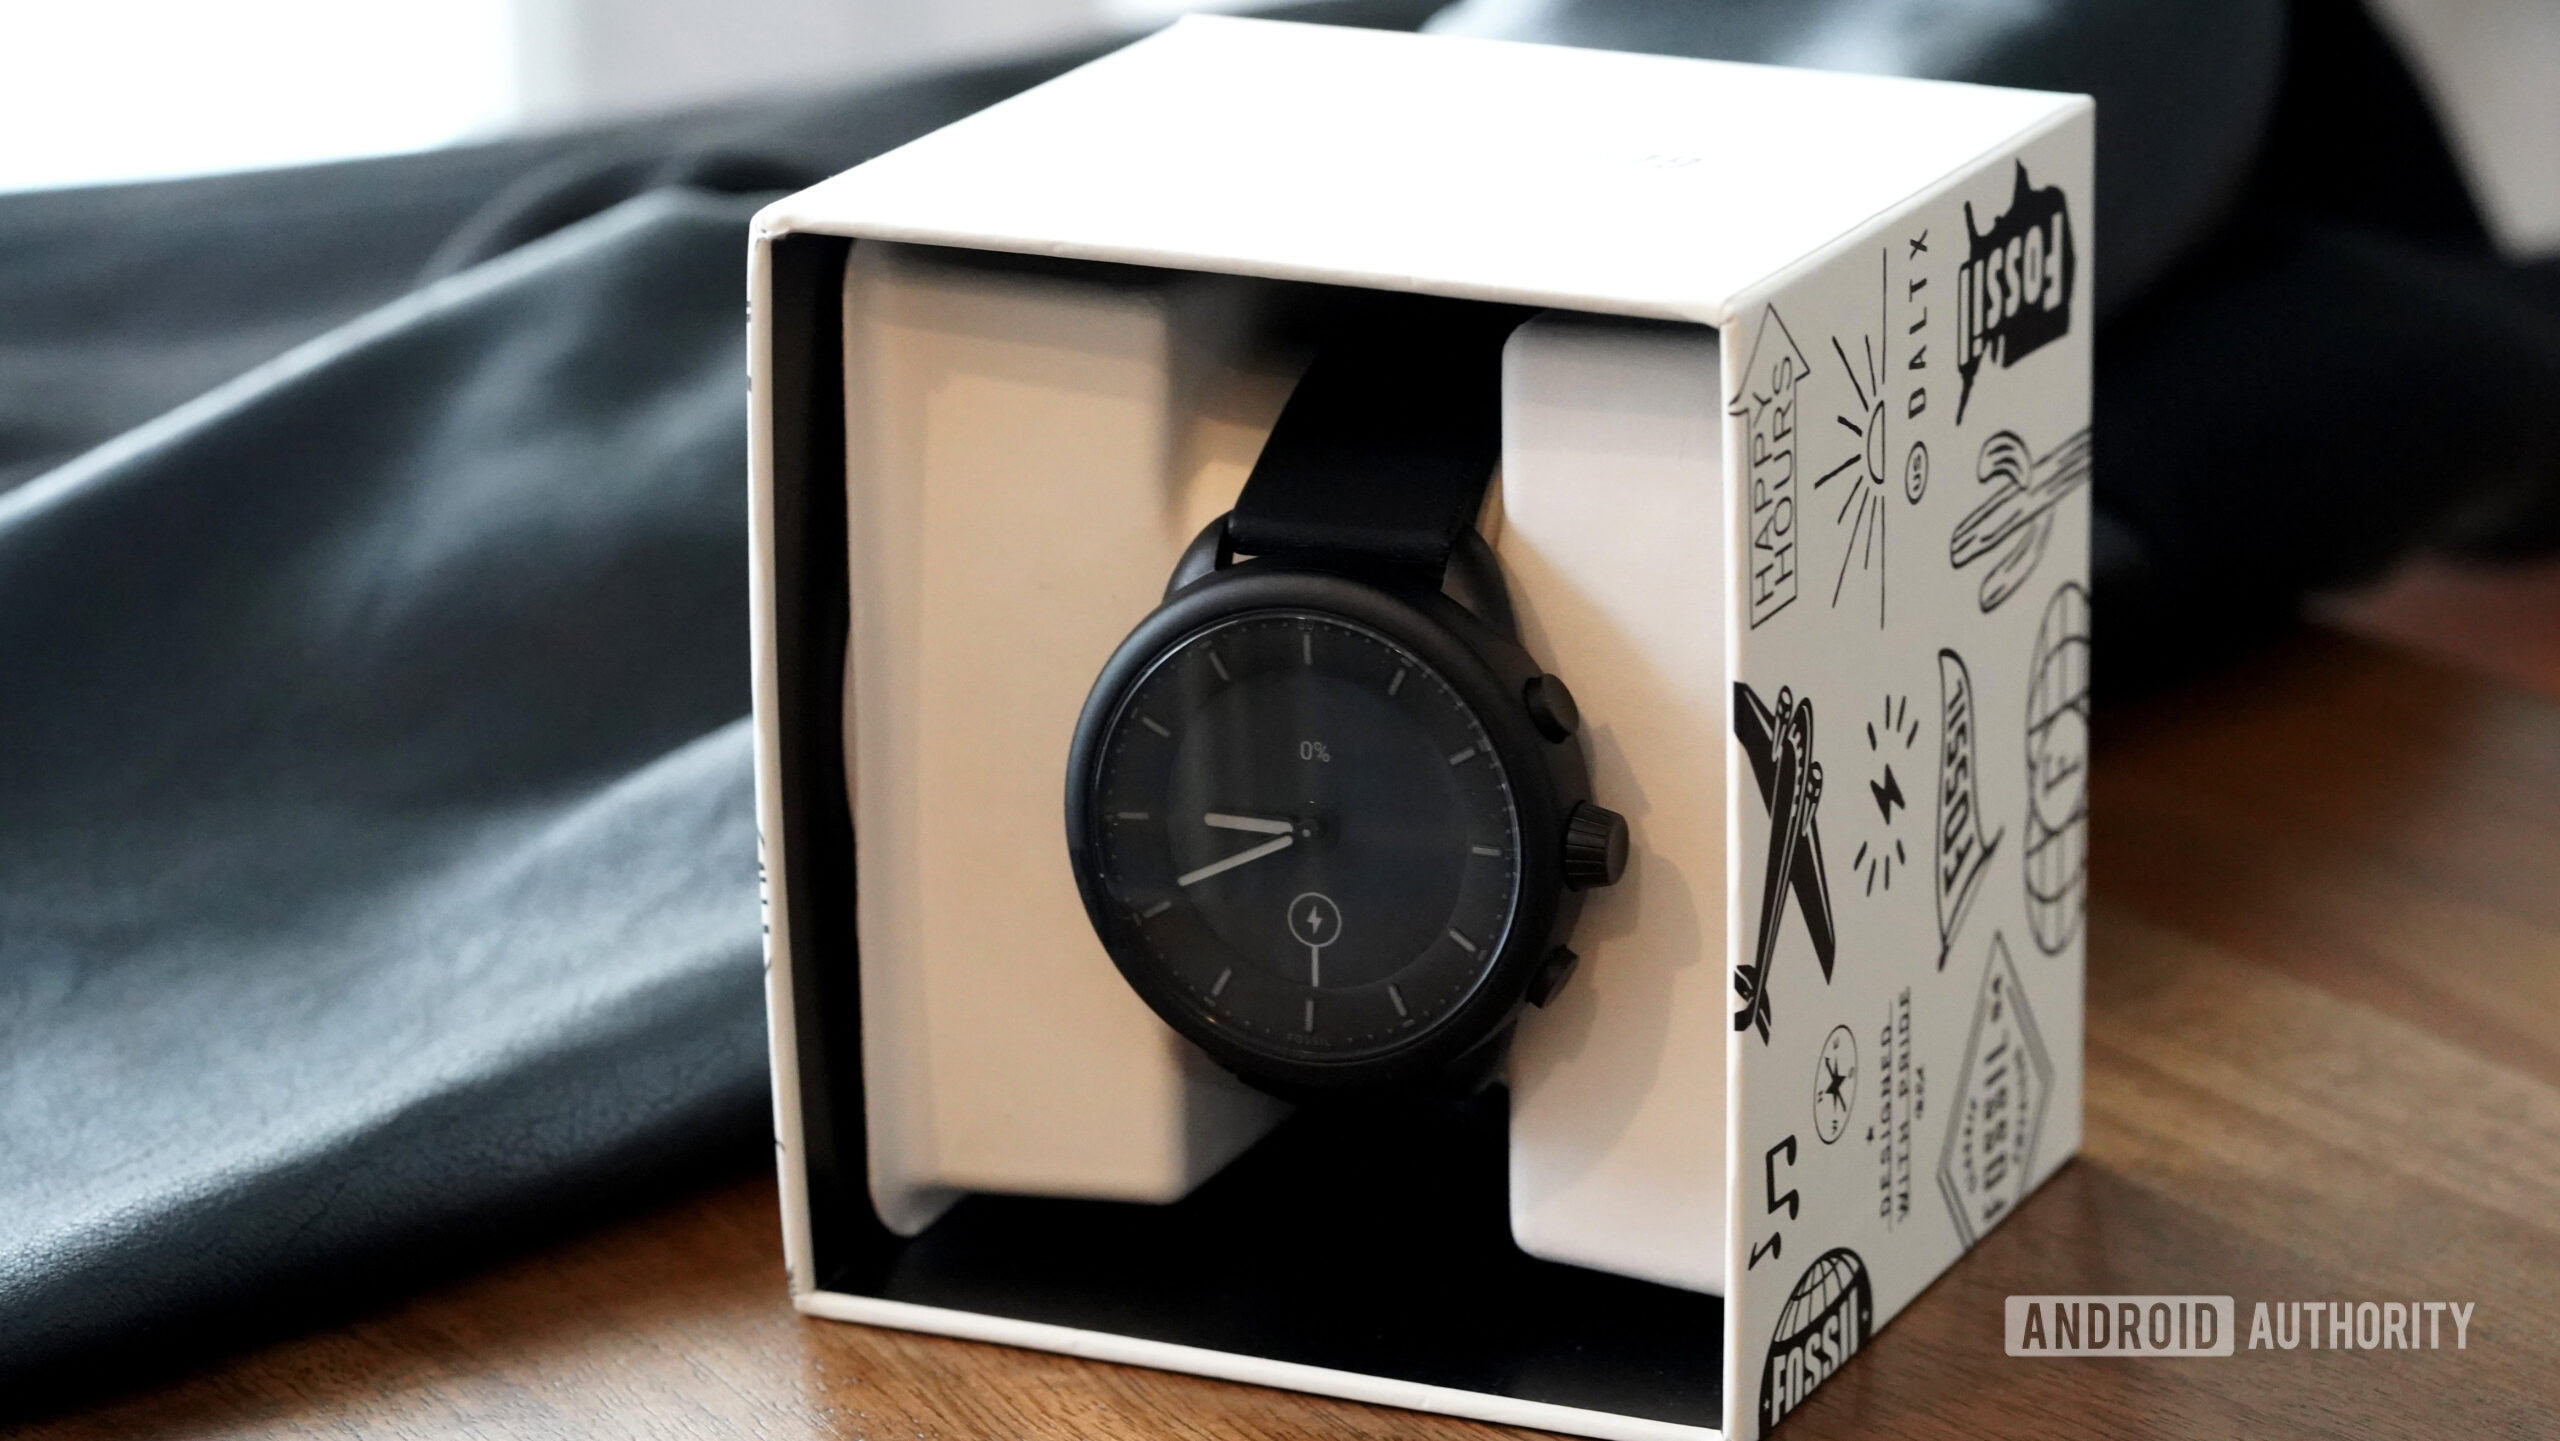 A Fossil Gen 6 Hybrid watch in its box rests on a wooden surface.